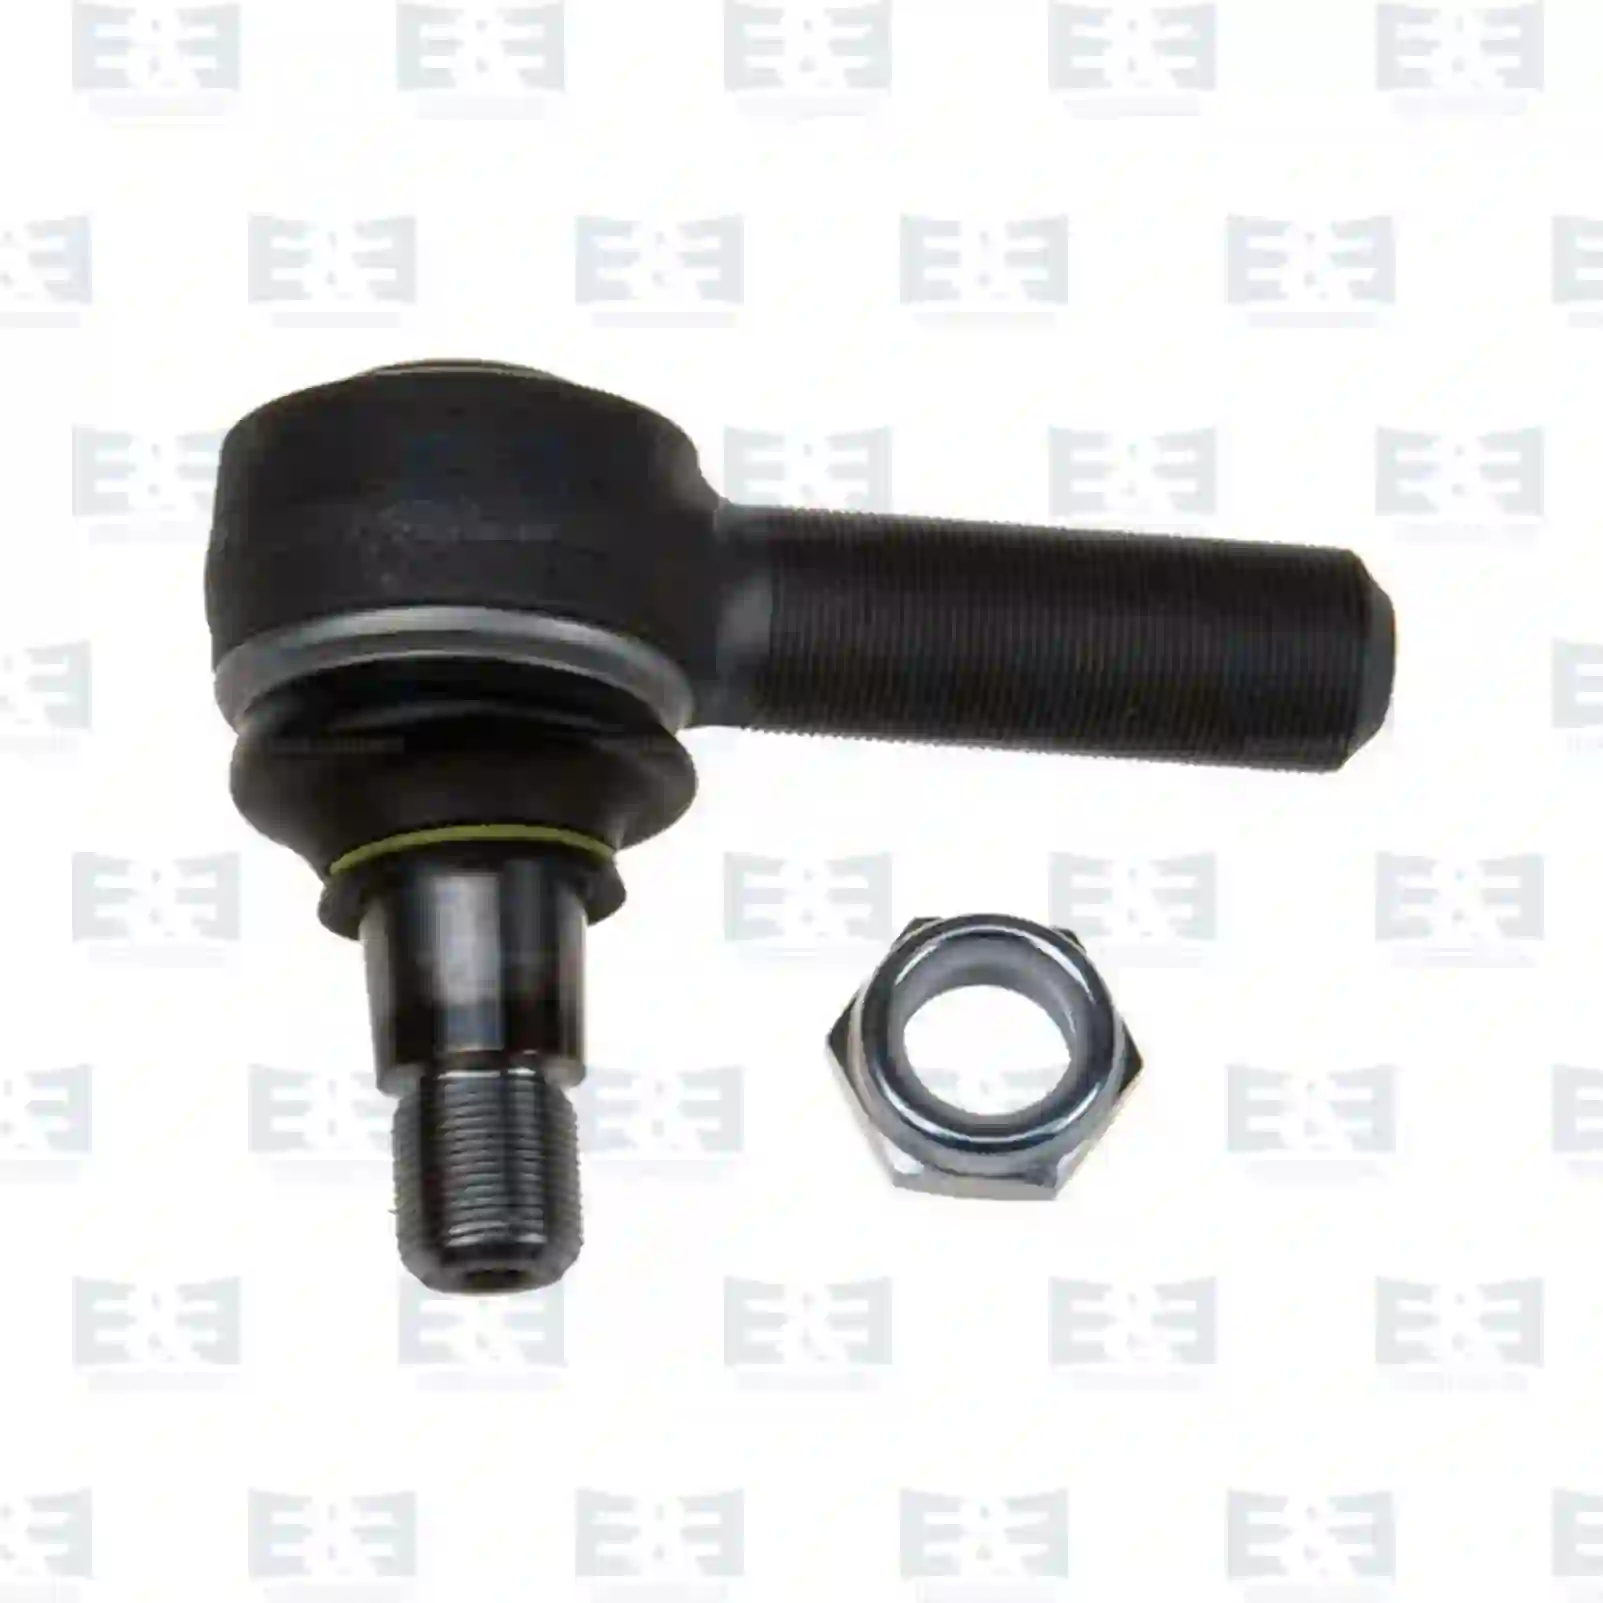 Drag Link Ball joint, right hand thread, EE No 2E2206137 ,  oem no:9P914836, 229872, 264074, 510053, 607981, 0069752, 0607981, 0696226, 0698450, 1142022, 1149907, 1152350, 1257890, 1603789, 1618048, 607981, 696226, 69752, 698450, ACHF060, F5045S, 655357, 6625413, 02966252, 02969808, 04311552, 04802443, 04833829, 07138967, 08122752, 3221270R91, 42483386, 42488269, 42489573, 42489594, 42491638, 42537936, 99708408375, Y04505003, 56811-7M000, 56811-7M100, 4030R11377, 02966252, 02969808, 04802443, 04833822, 04833829, 07138967, 08122752, 2966252, 2969808, 42483386, 42483388, 42488269, 42489573, 42489594, 42491638, 42537936, 42565955, 4802443, 4833822, 4833829, 5001858773, 801211835, 8122752, 93194576, 45/8M1380, 571866608, 725010008, 81953010016, 81953010075, 81953010084, 81953010088, 81953010094, 81953010103, 81953016012, 81953016030, 81953016043, 81953016048, 81953016049, 81953016053, 81953016061, 81953016090, 81953016100, 81953016108, 81953016112, 81953016126, 81953016143, 81953016149, 81953016154, 81953016156, 81953016168, 81953016178, 81953016194, 81953016206, 81953016224, 81953016234, 81953016242, 81953016252, 81953016274, 81953016278, 81953016284, 81953016308, 81953016310, 81953016312, 81953016347, 81953016350, 81953016352, 81953016374, 81953016014, 82953016012, 88953016014, 90804102156, 90804102272, 90804102696, 90804102710, N1011020300, N2953016001, 0003305248, 0003387310, 0003406169, 0003406251, 0003406254, 0003406260, 0003406261, 0003406326, 0004600348, 0004600948, 0004601048, 0004602848, 0004602948, 0004605235, 0004608948, 0004630218, 0004630418, 0004630518, 0004630618, 0014600248, 0014600848, 0014601248, 0014602248, 0014607748, 0014608048, 0024600148, 3503307235, 3503307435, 6851531000, 8226236059, 011019659, 014013769, 120325000, 122353202, 16H0007006AA, 0003406169, 0003406236, 0003406251, 0003406254, 0003406260, 0003406261, 5000240688, 5000242475, 5000242479, 5000242485, 5000253852, 5000275496, 5000288360, 5000590236, 5000804824, 5000819349, 5000858773, 5001836298, 5001858760, 5001858773, 5010832582, 7420894052, 7701011412, 1370720, 1420822, 1435746, 1435756, 1738381, 1767328, 1899667, 1914427, 2051166, 283784, 345118, 345188, 395010, 6851475000, 6851480000, 6851484000, 8226236059, 1605300183, 1605300184, 0801211835, 0820352140, 218633100116, 310310, 634301250, 20350395, 20742127, 20745043, 20821160, 20862494, 20894052, 85101766, 2V5422817A, ZG40364-0008 E&E Truck Spare Parts | Truck Spare Parts, Auotomotive Spare Parts